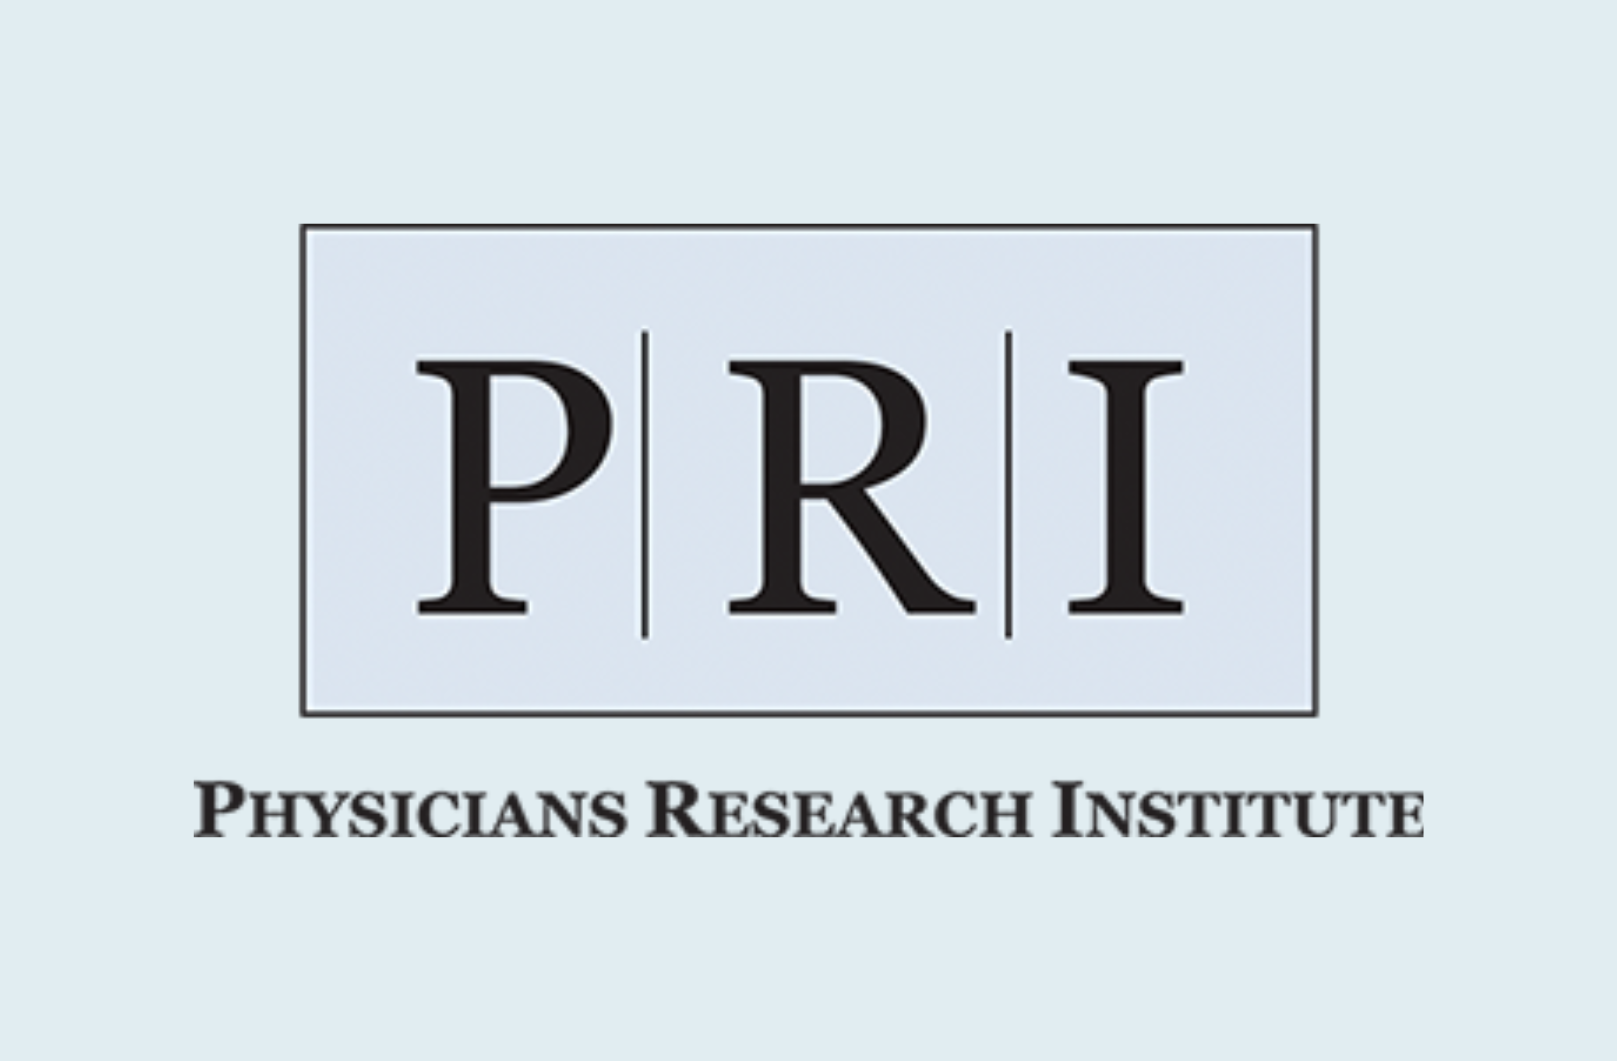 Physicians Research Institute logo